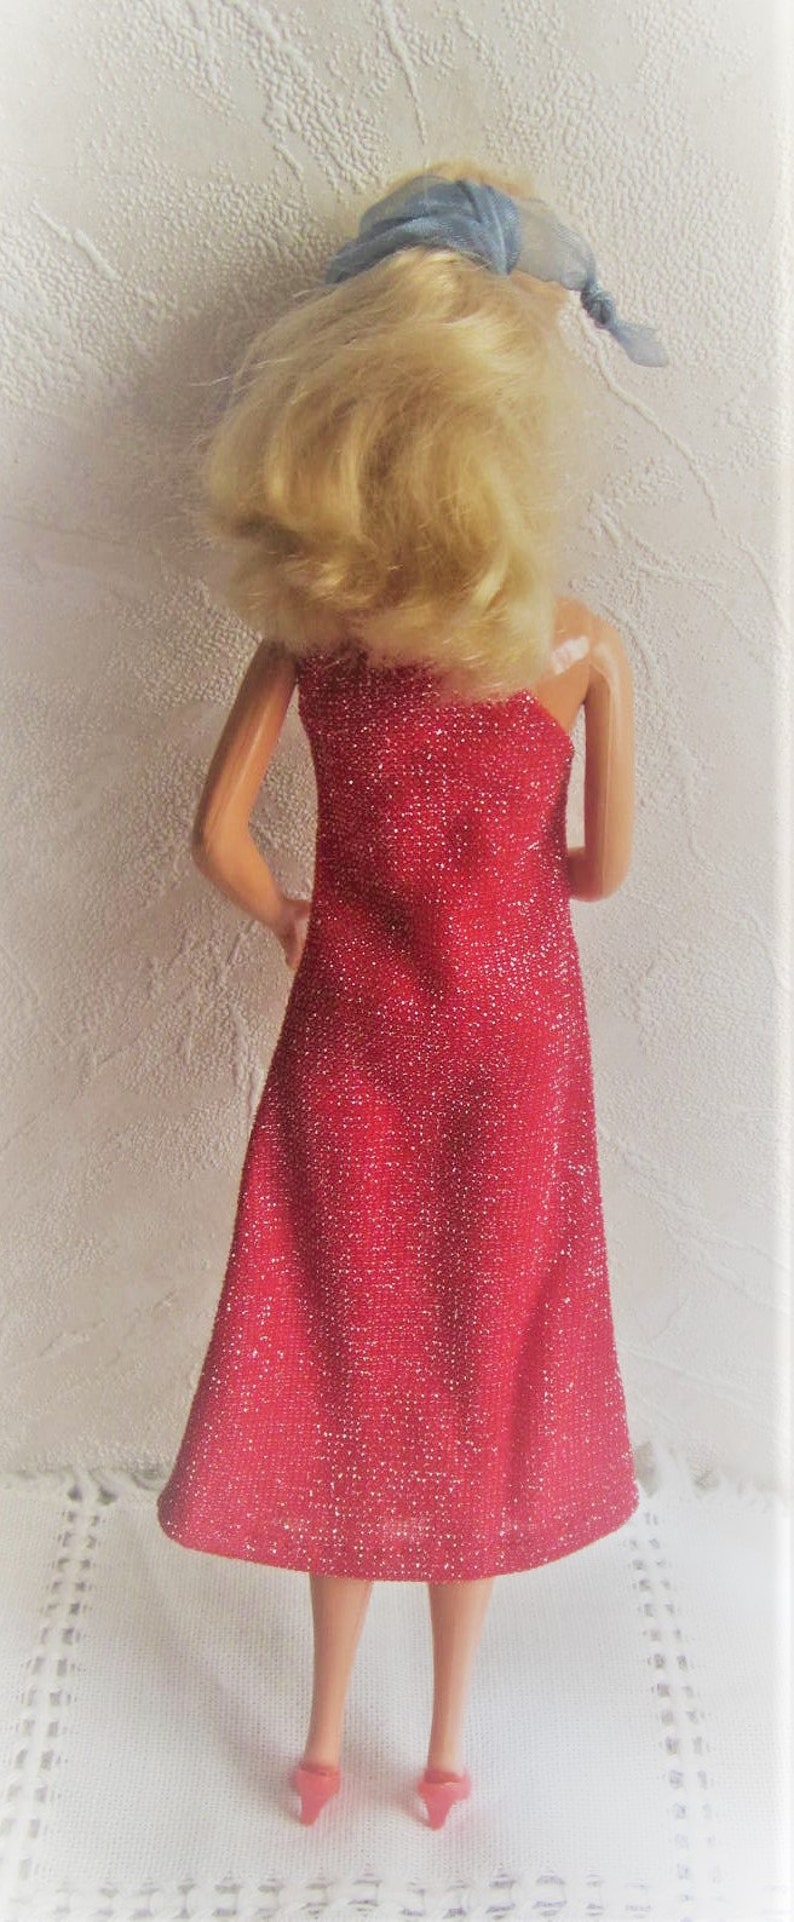 80s Superstar Barbie with Red Gown Vintage Barbie Red Glitter Dress 1986 Blonde Barbie Malaysia image 3